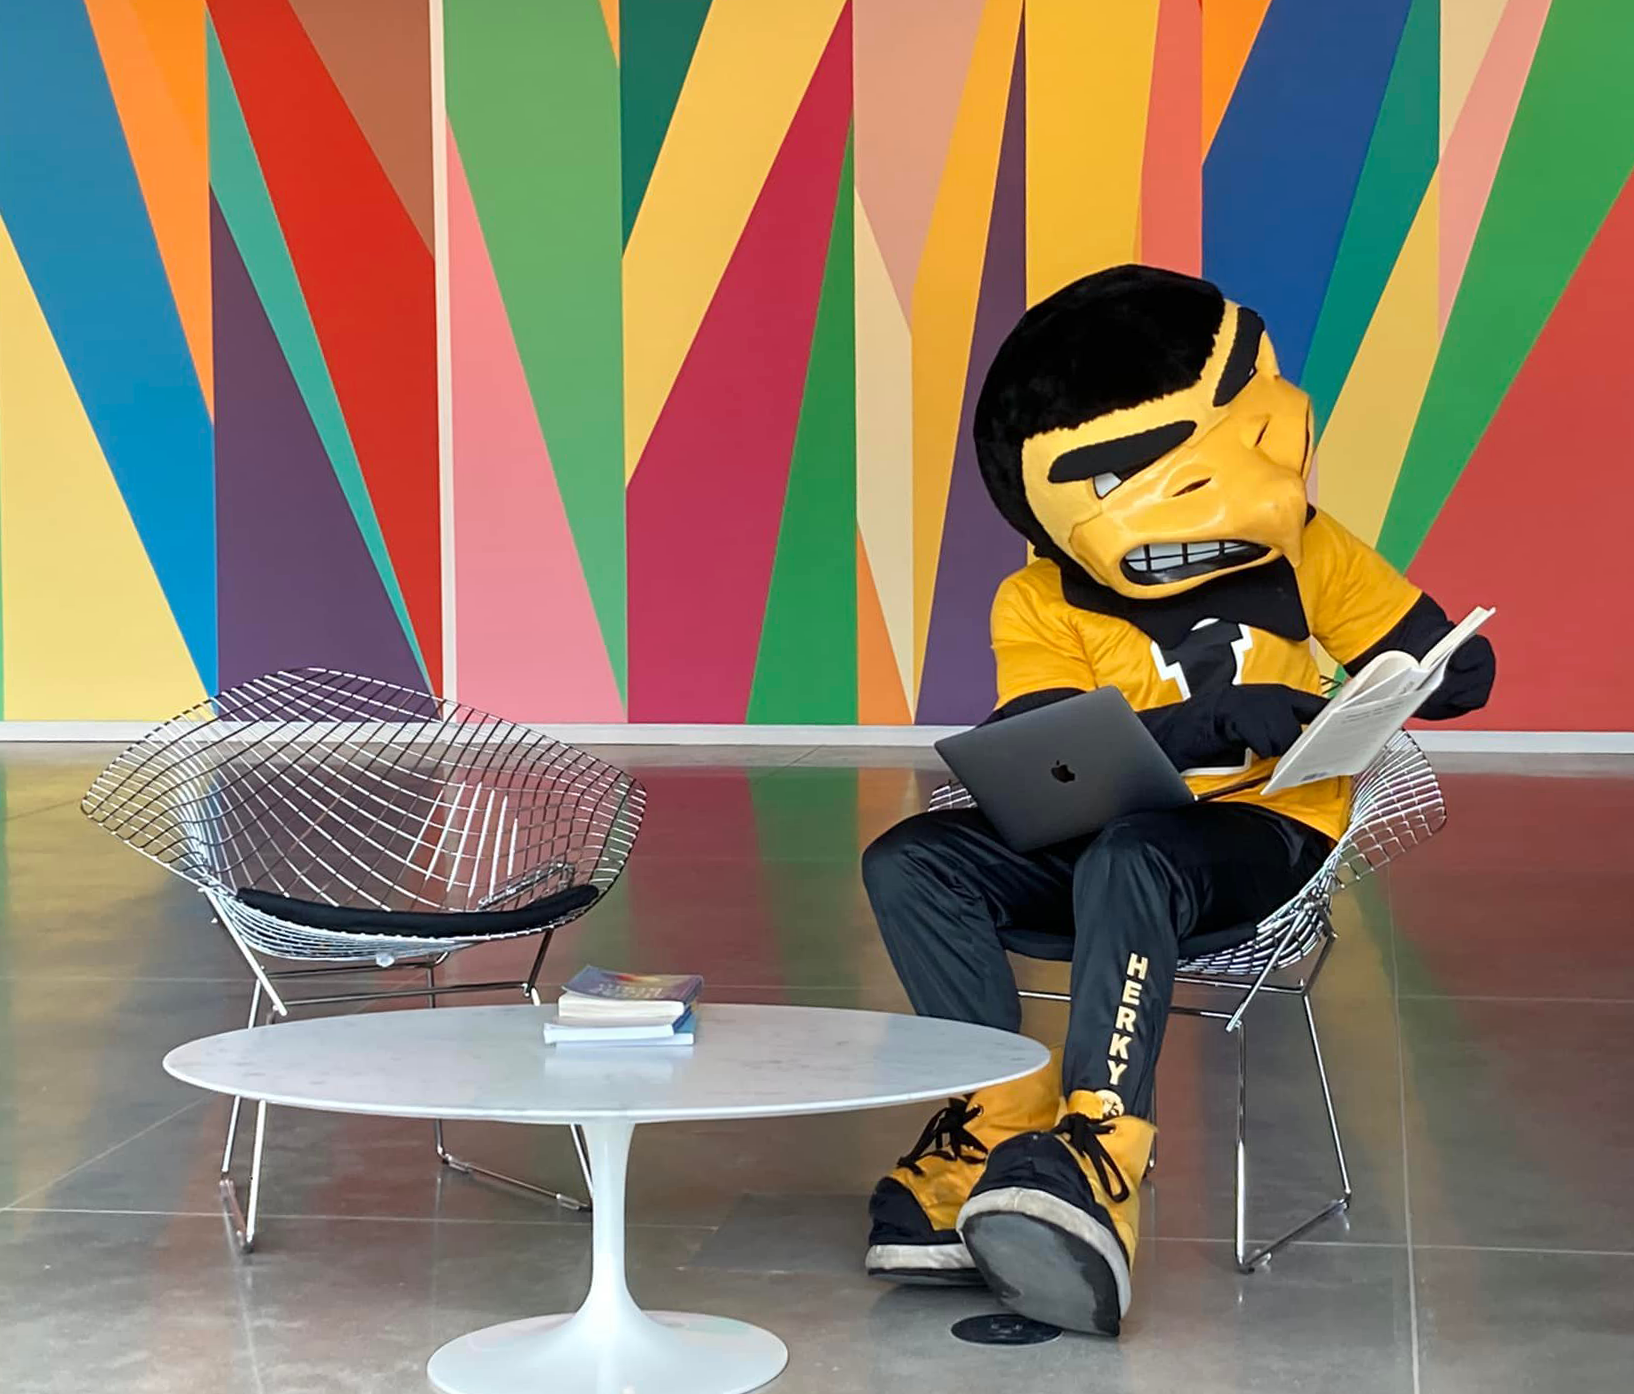 Herky, the University of Iowa mascot, sits in one of the chairs in the Stanley Museum of Art lobby. He is studying, with a computer on his lap and a book in his hands.